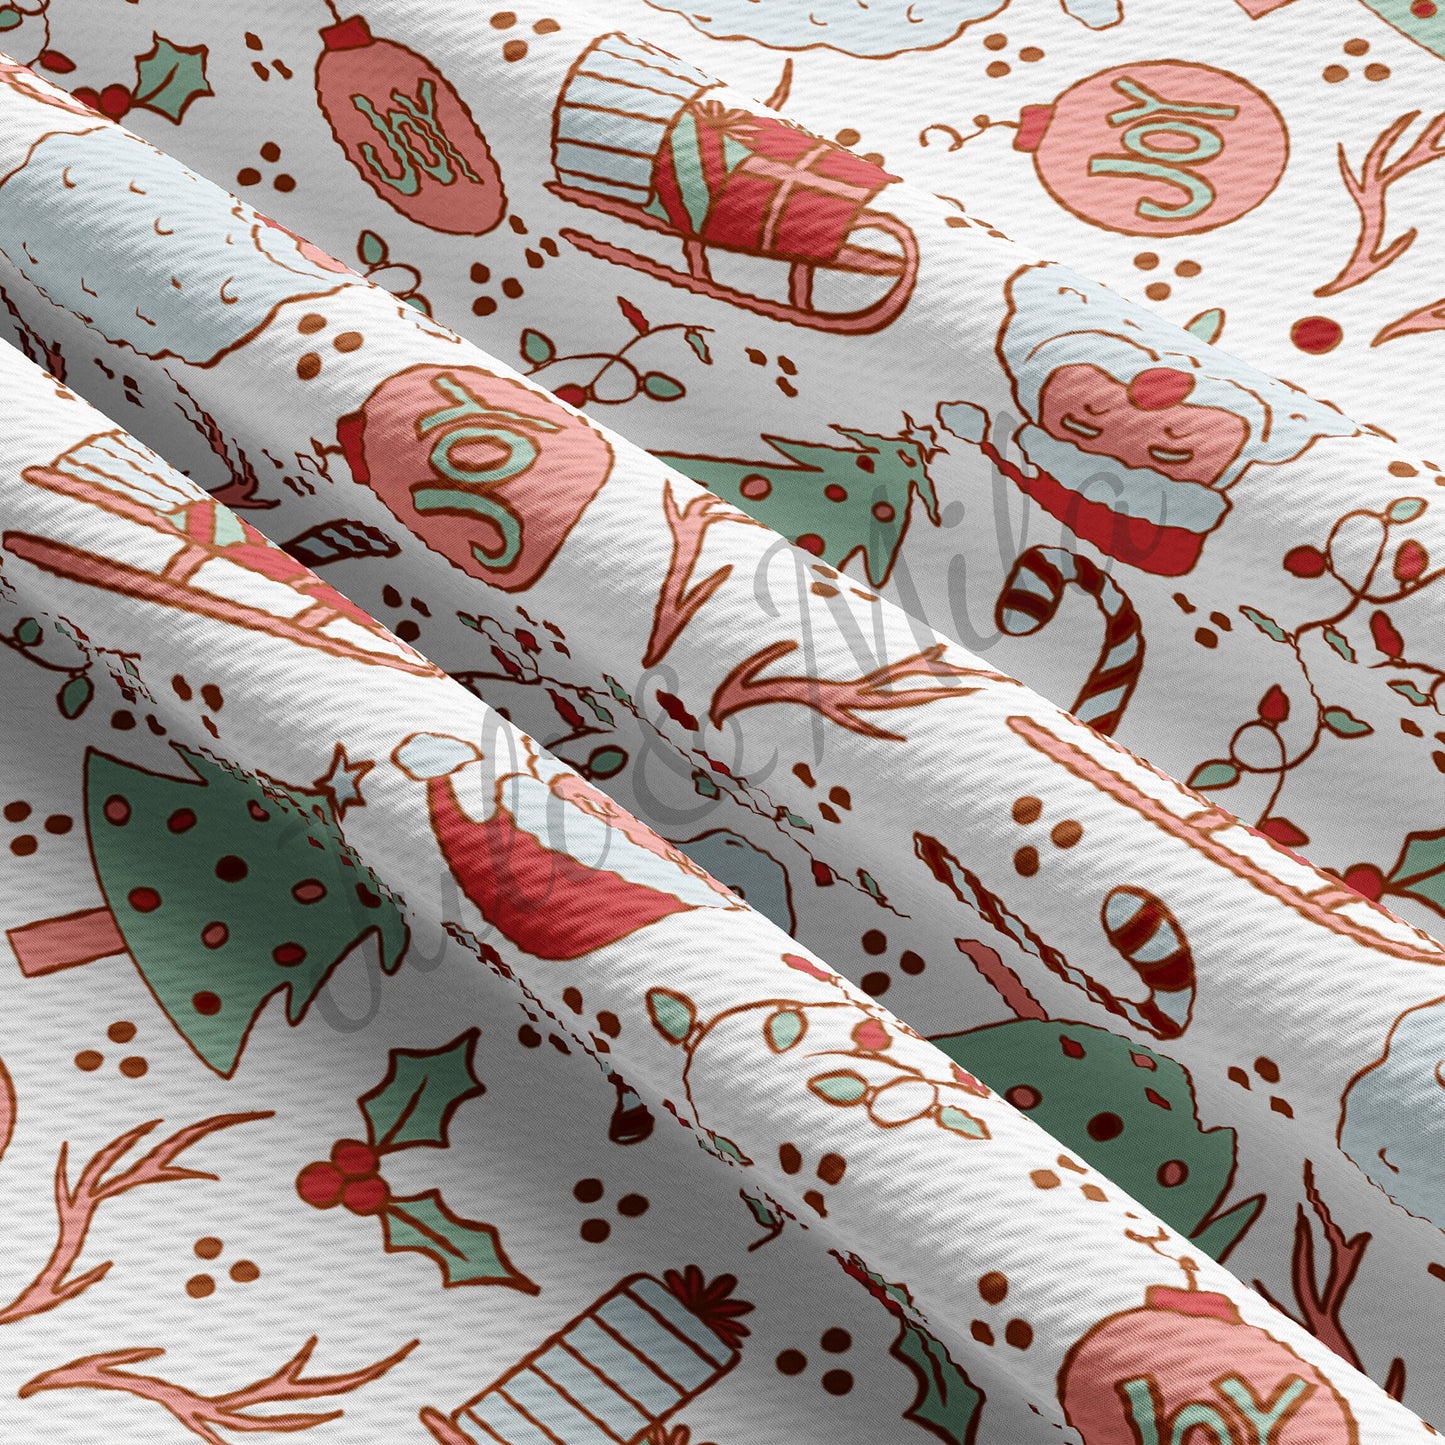 Christmas Printed Liverpool Bullet Textured Fabric by the yard 4Way Stretch Solid Strip Thick Knit Jersey Liverpool Fabric christmaseries66